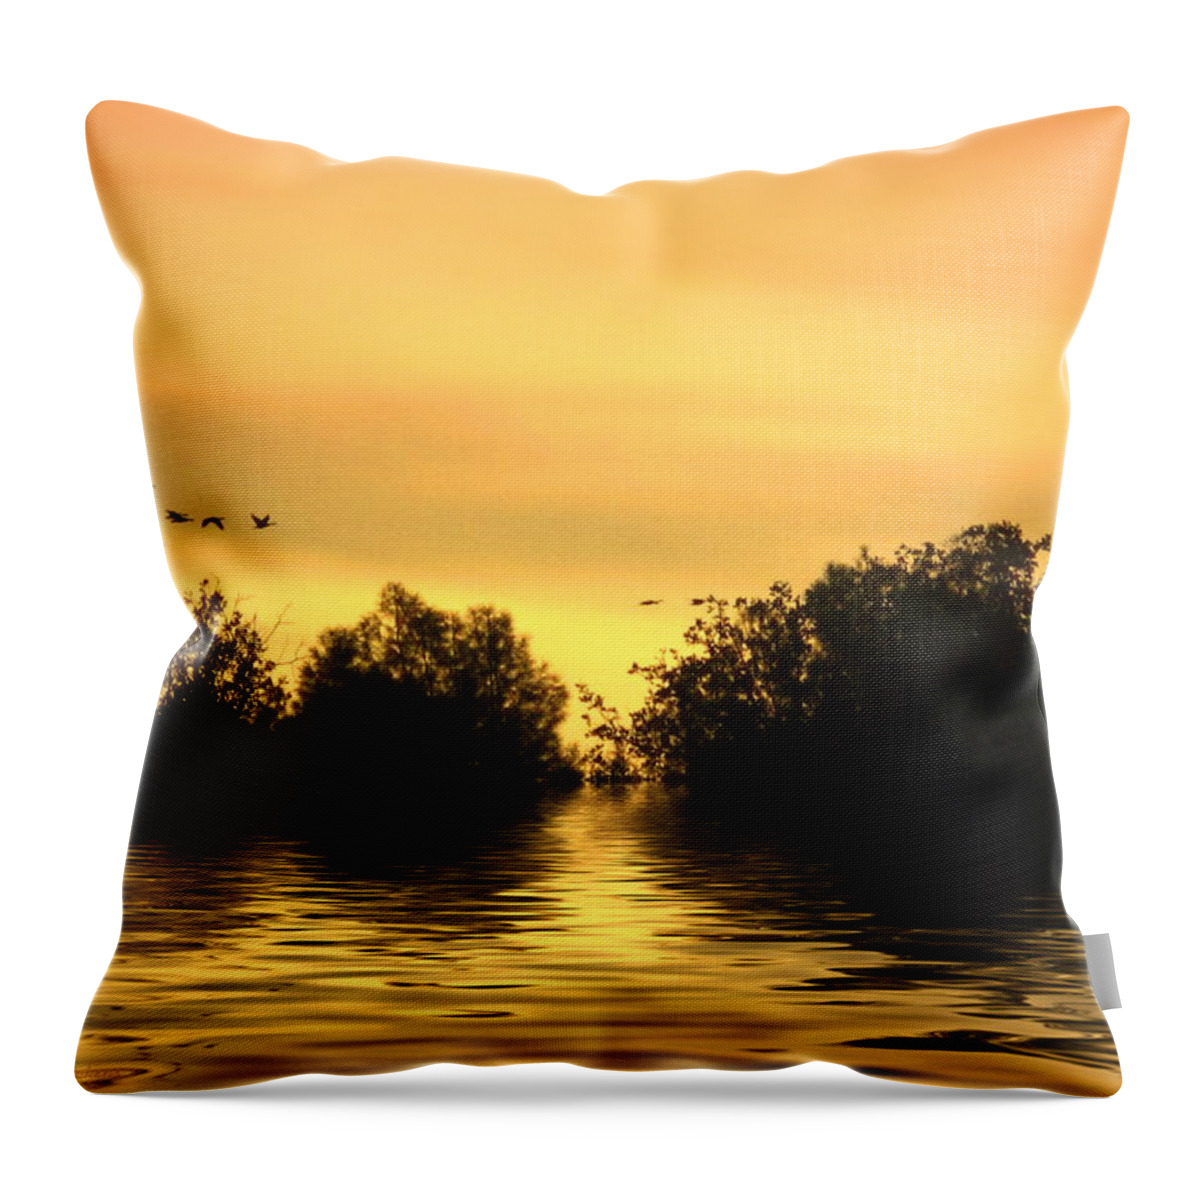 Sunset Throw Pillow featuring the photograph On Golden Pond by Joyce Dickens